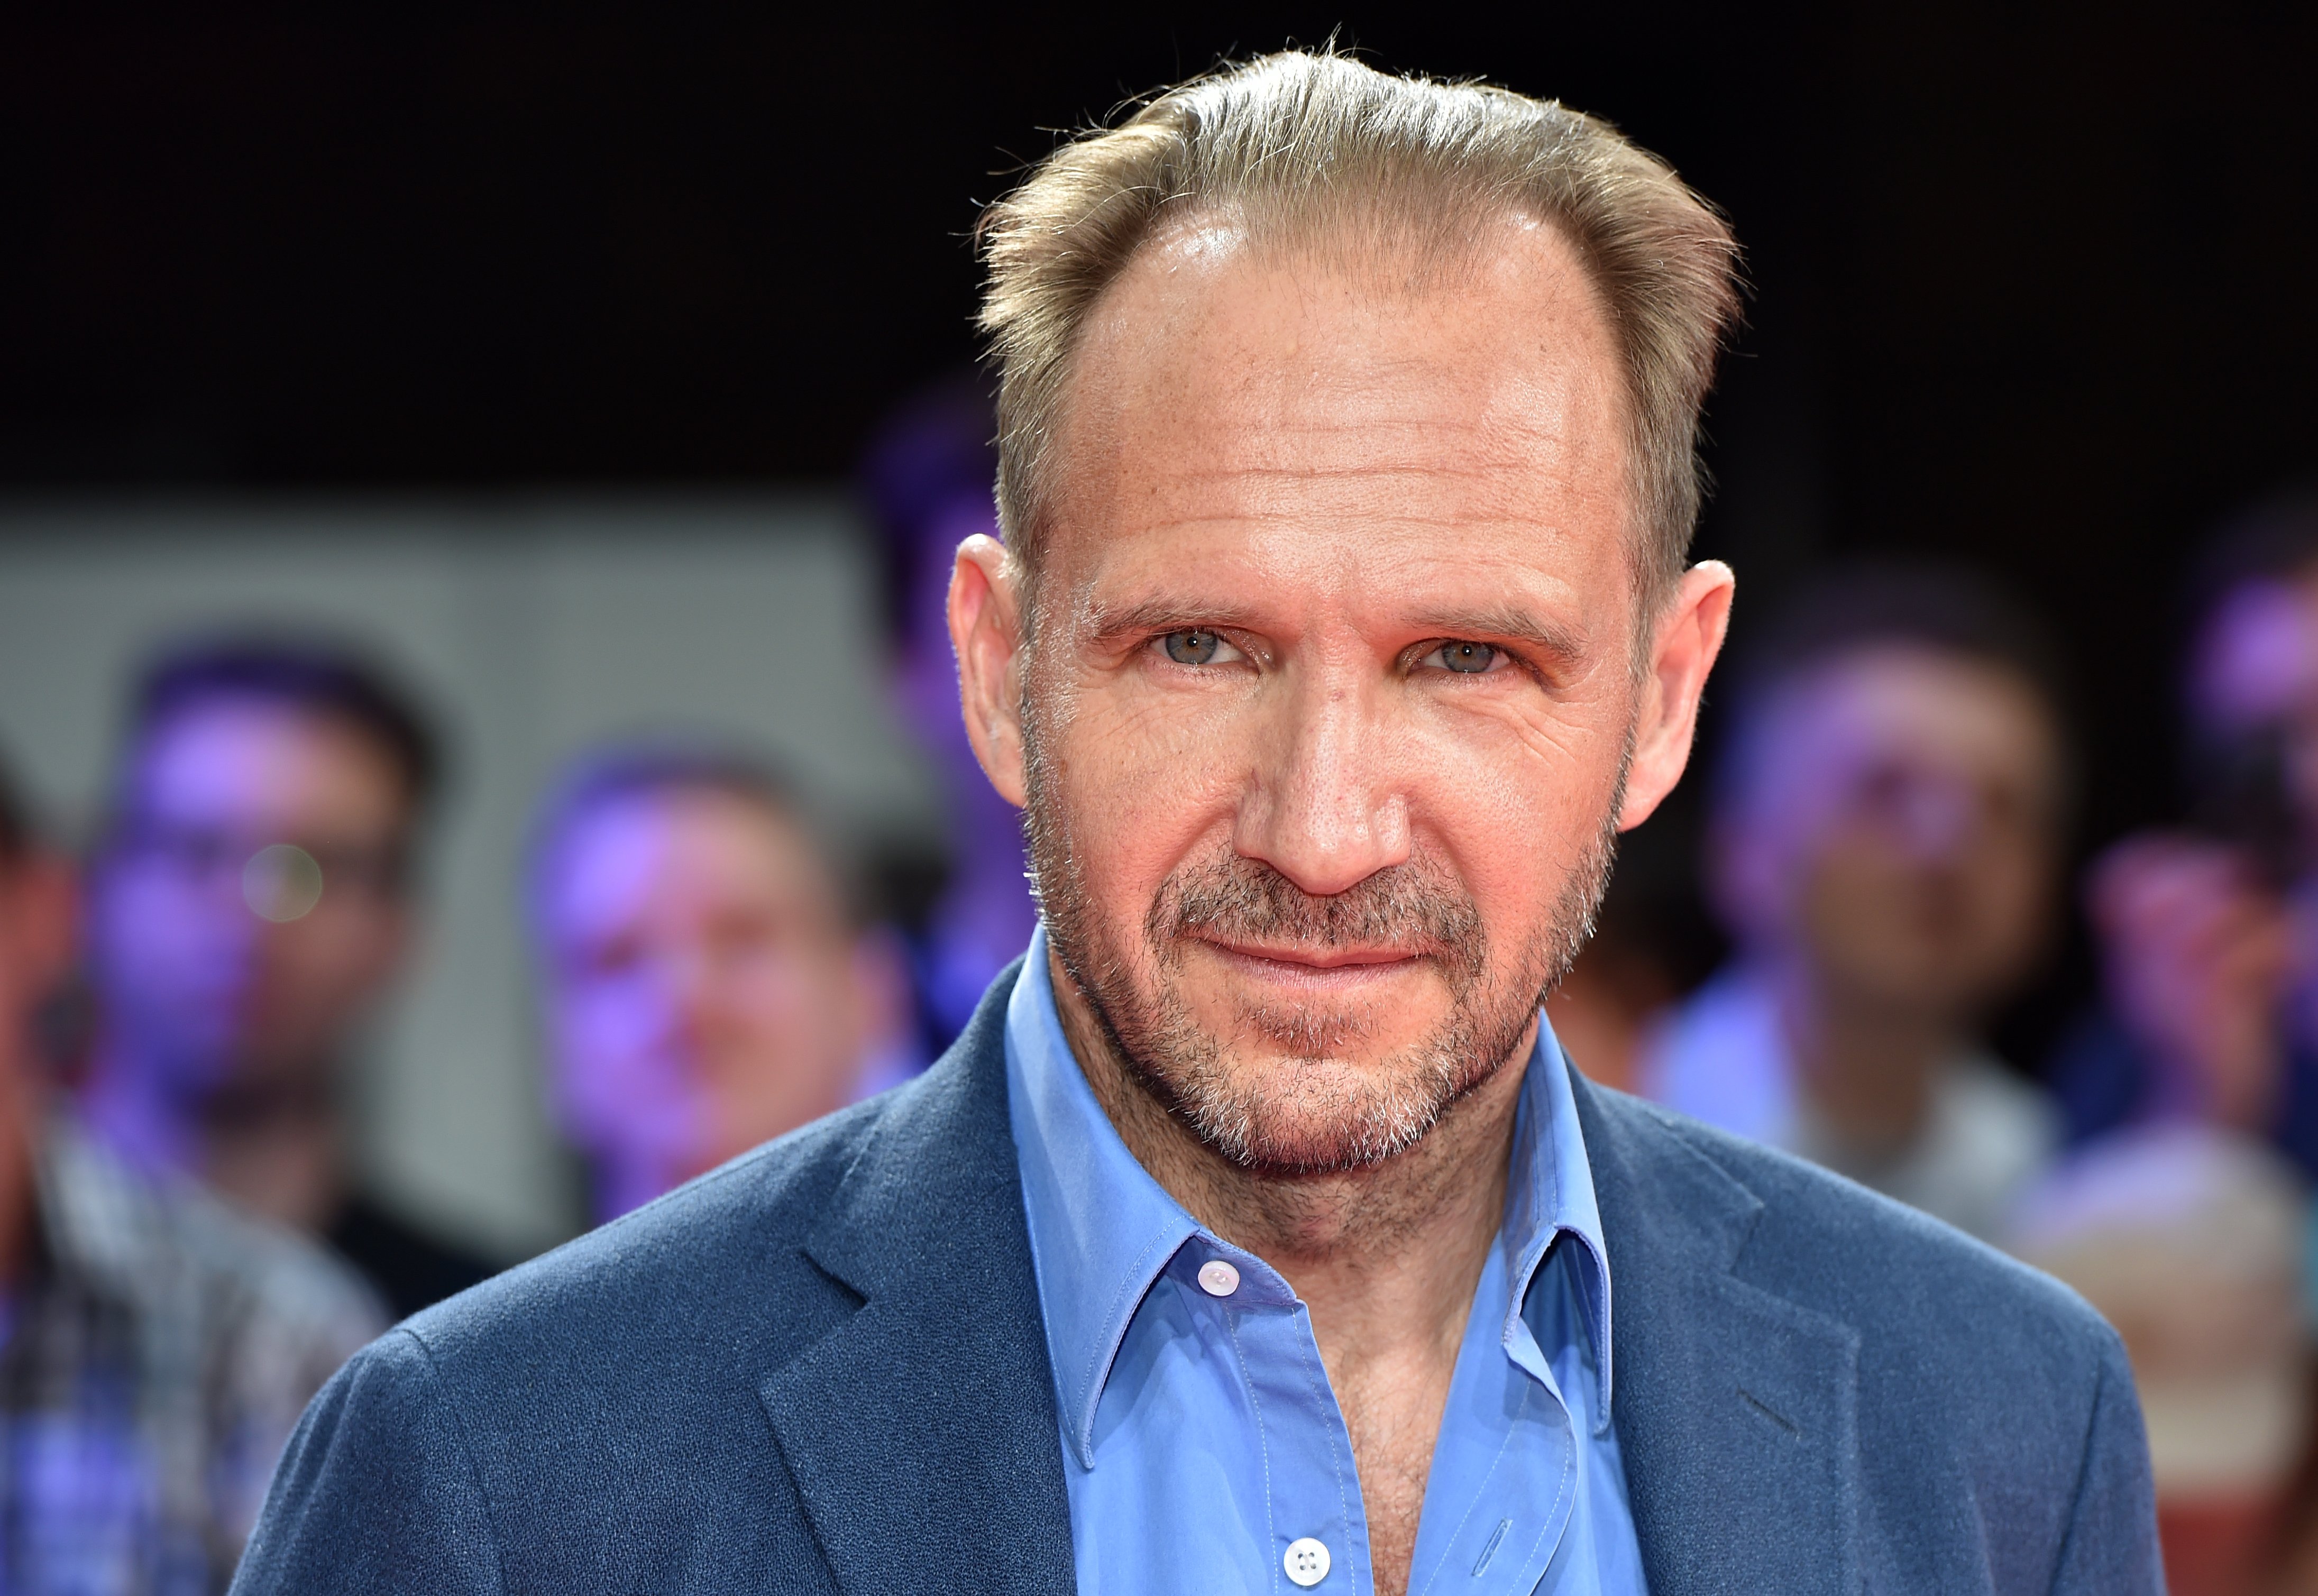 Ralph Fiennes attends the CineMerit Gala at the Munich Film Festival at Gasteig on July 1, 2019, in Munich, Germany. | Source: Getty Images